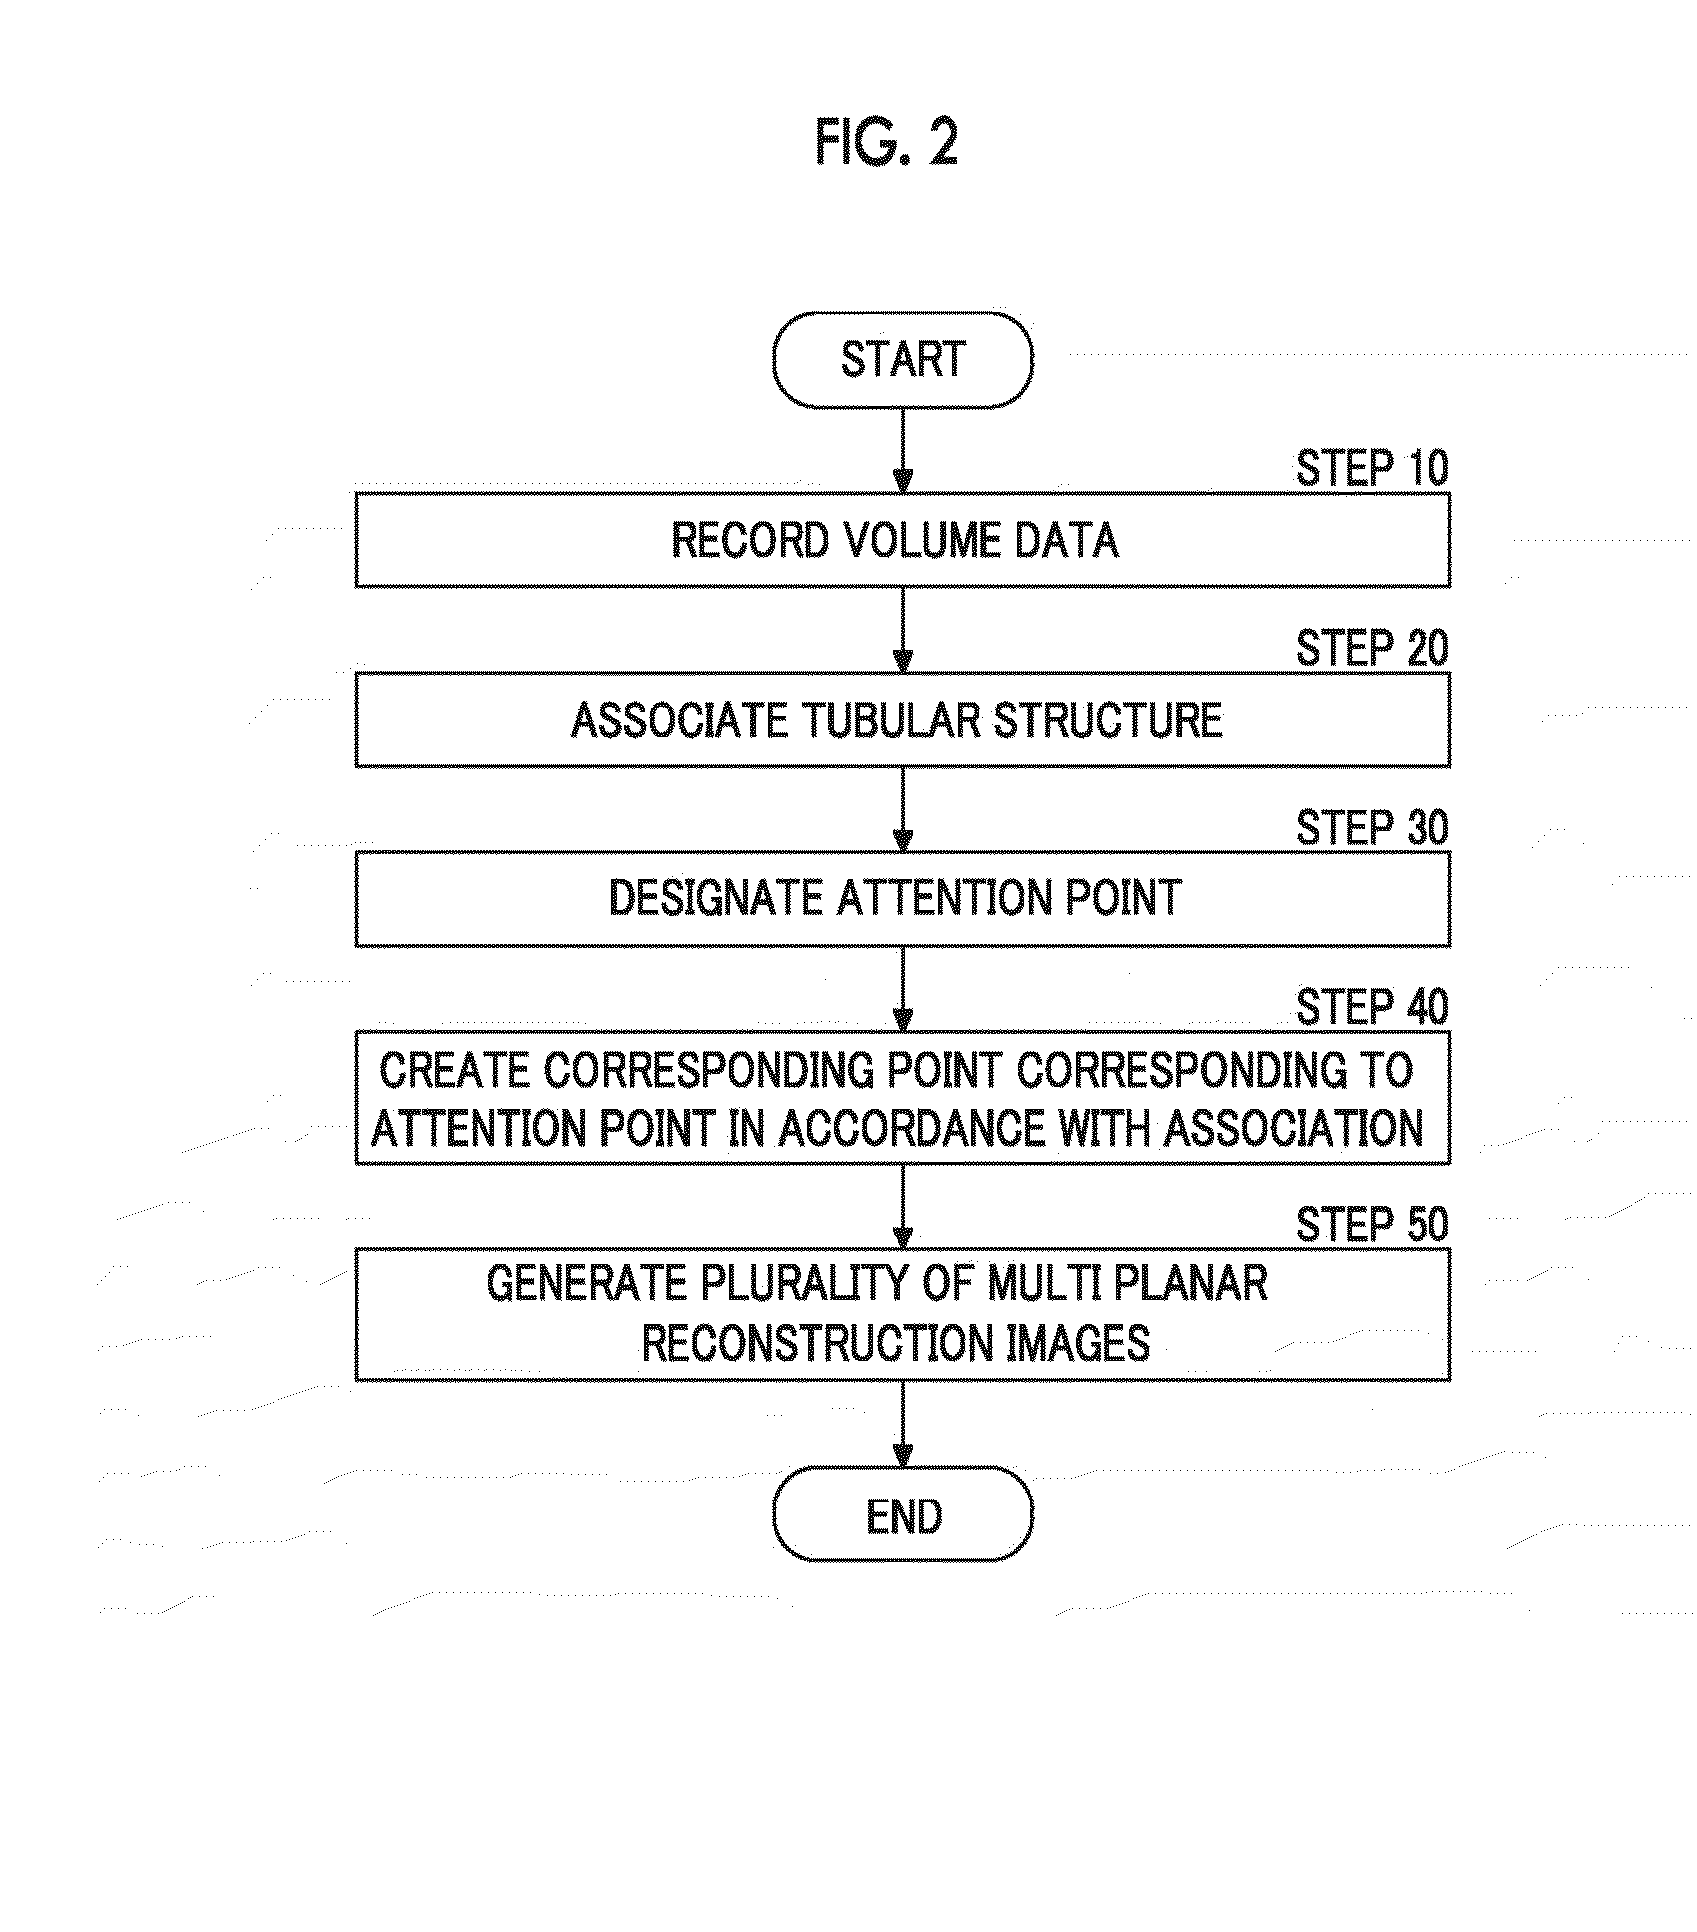 Medical image processing system, recording medium having recorded thereon a medical image processing program and medical image processing method